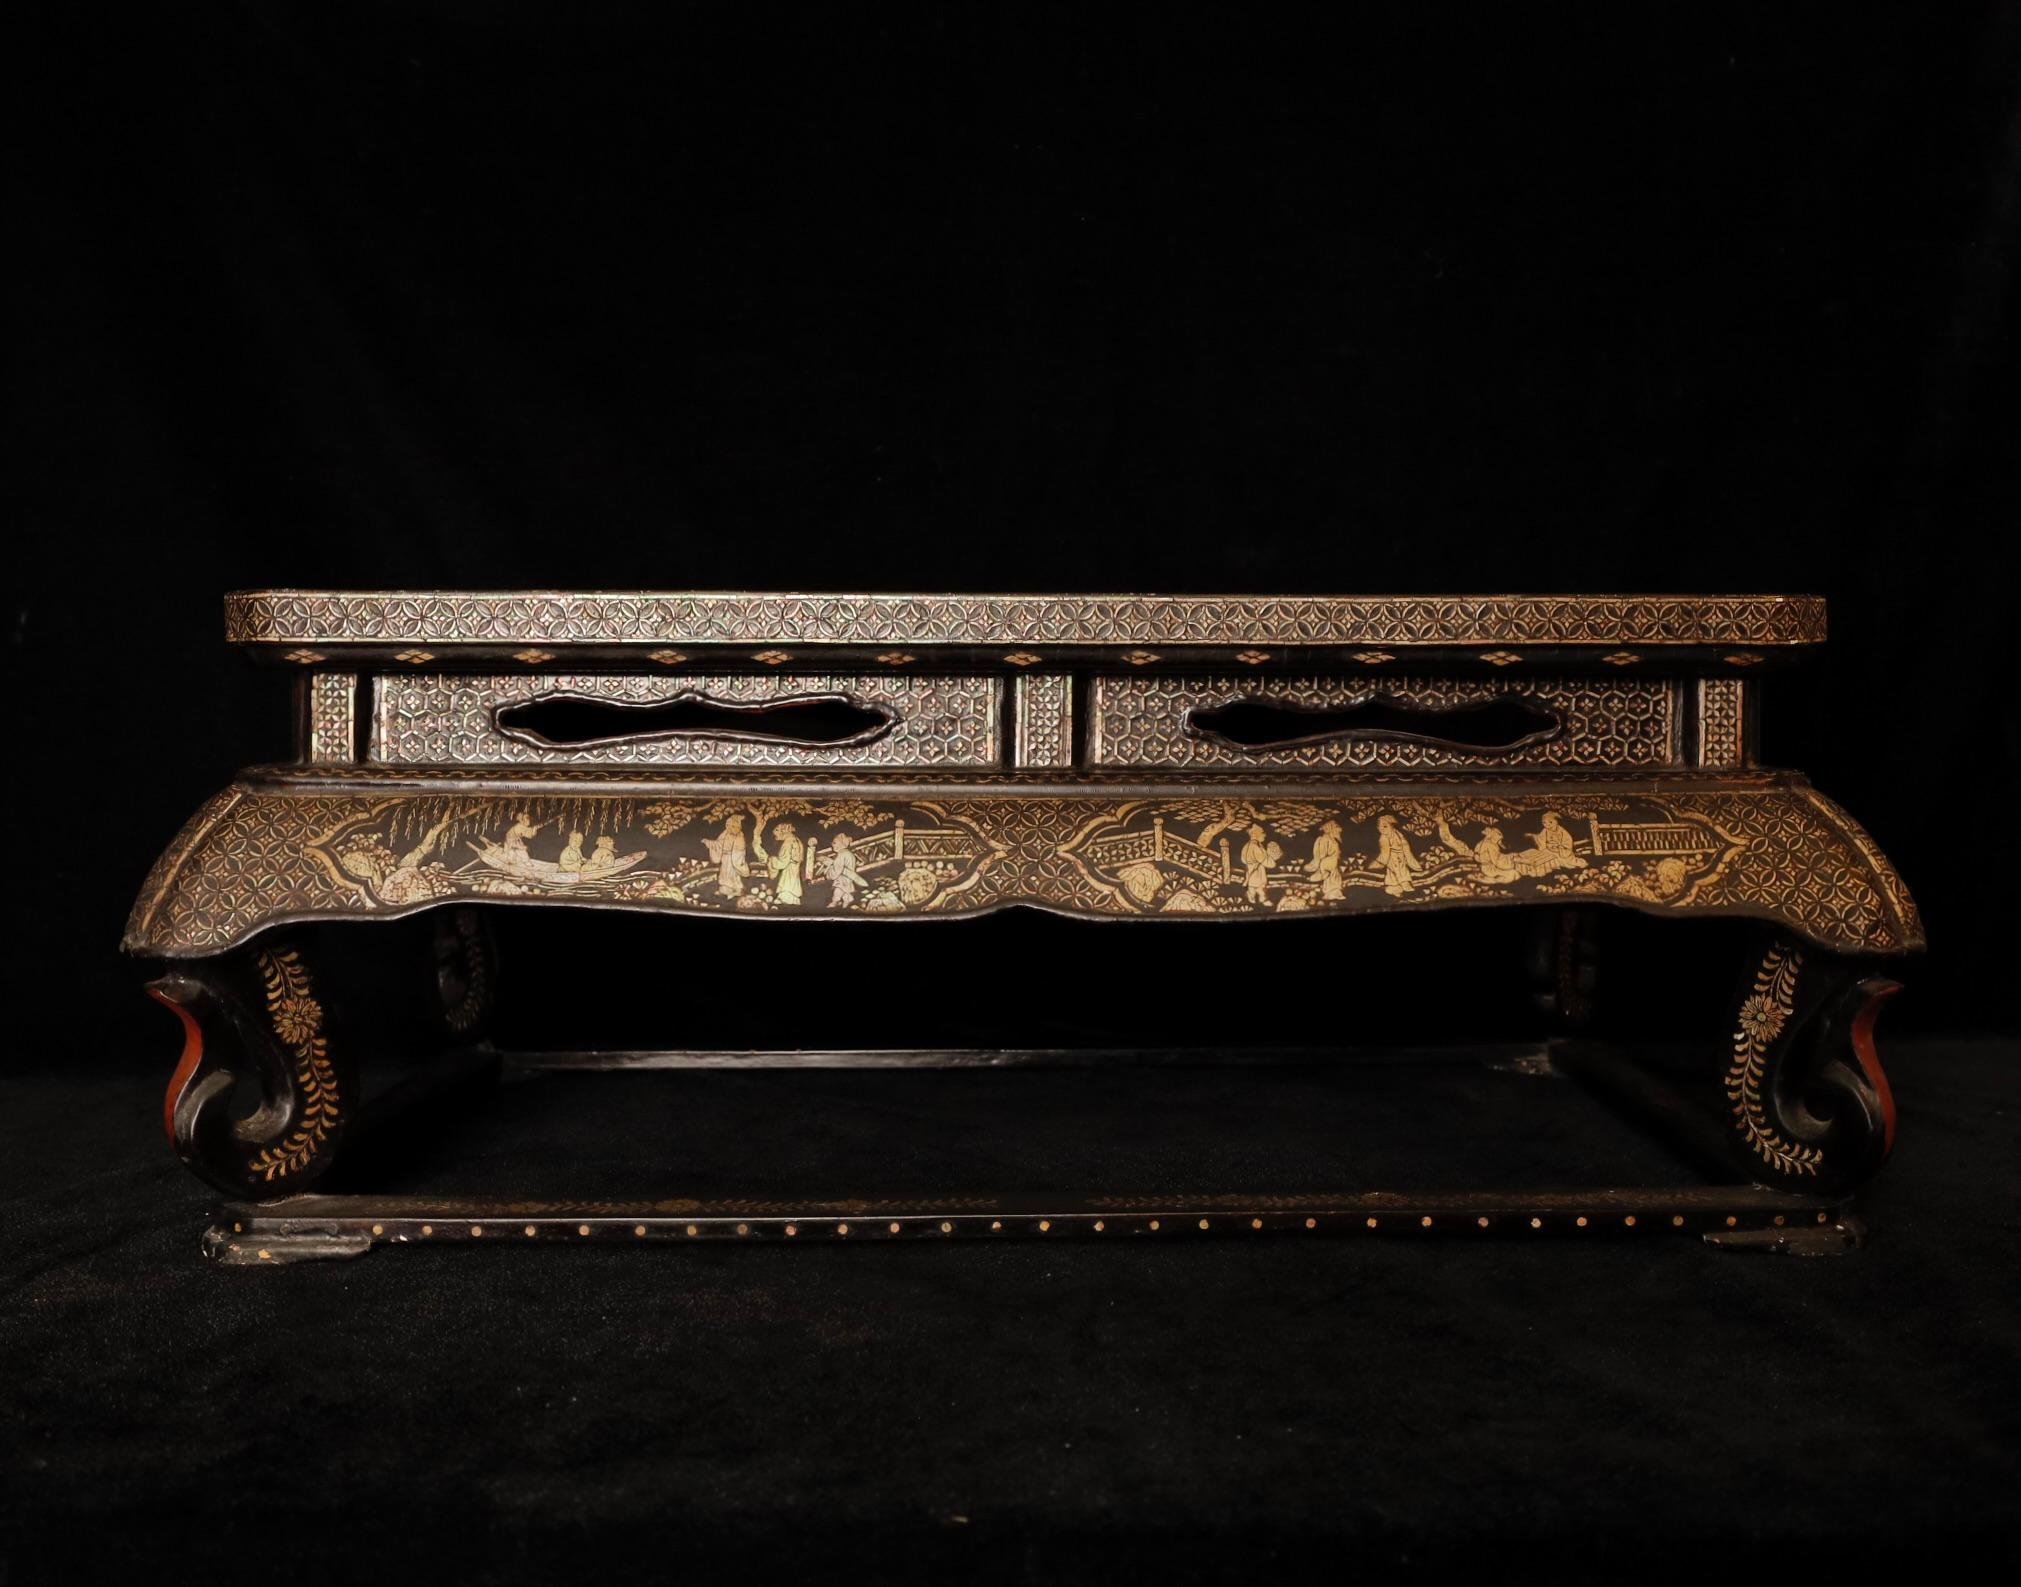 Ming Dynasty Period Scholar's Garden: Mother-of-Pearl Inlaid Lacquer Kang Table For Sale 8